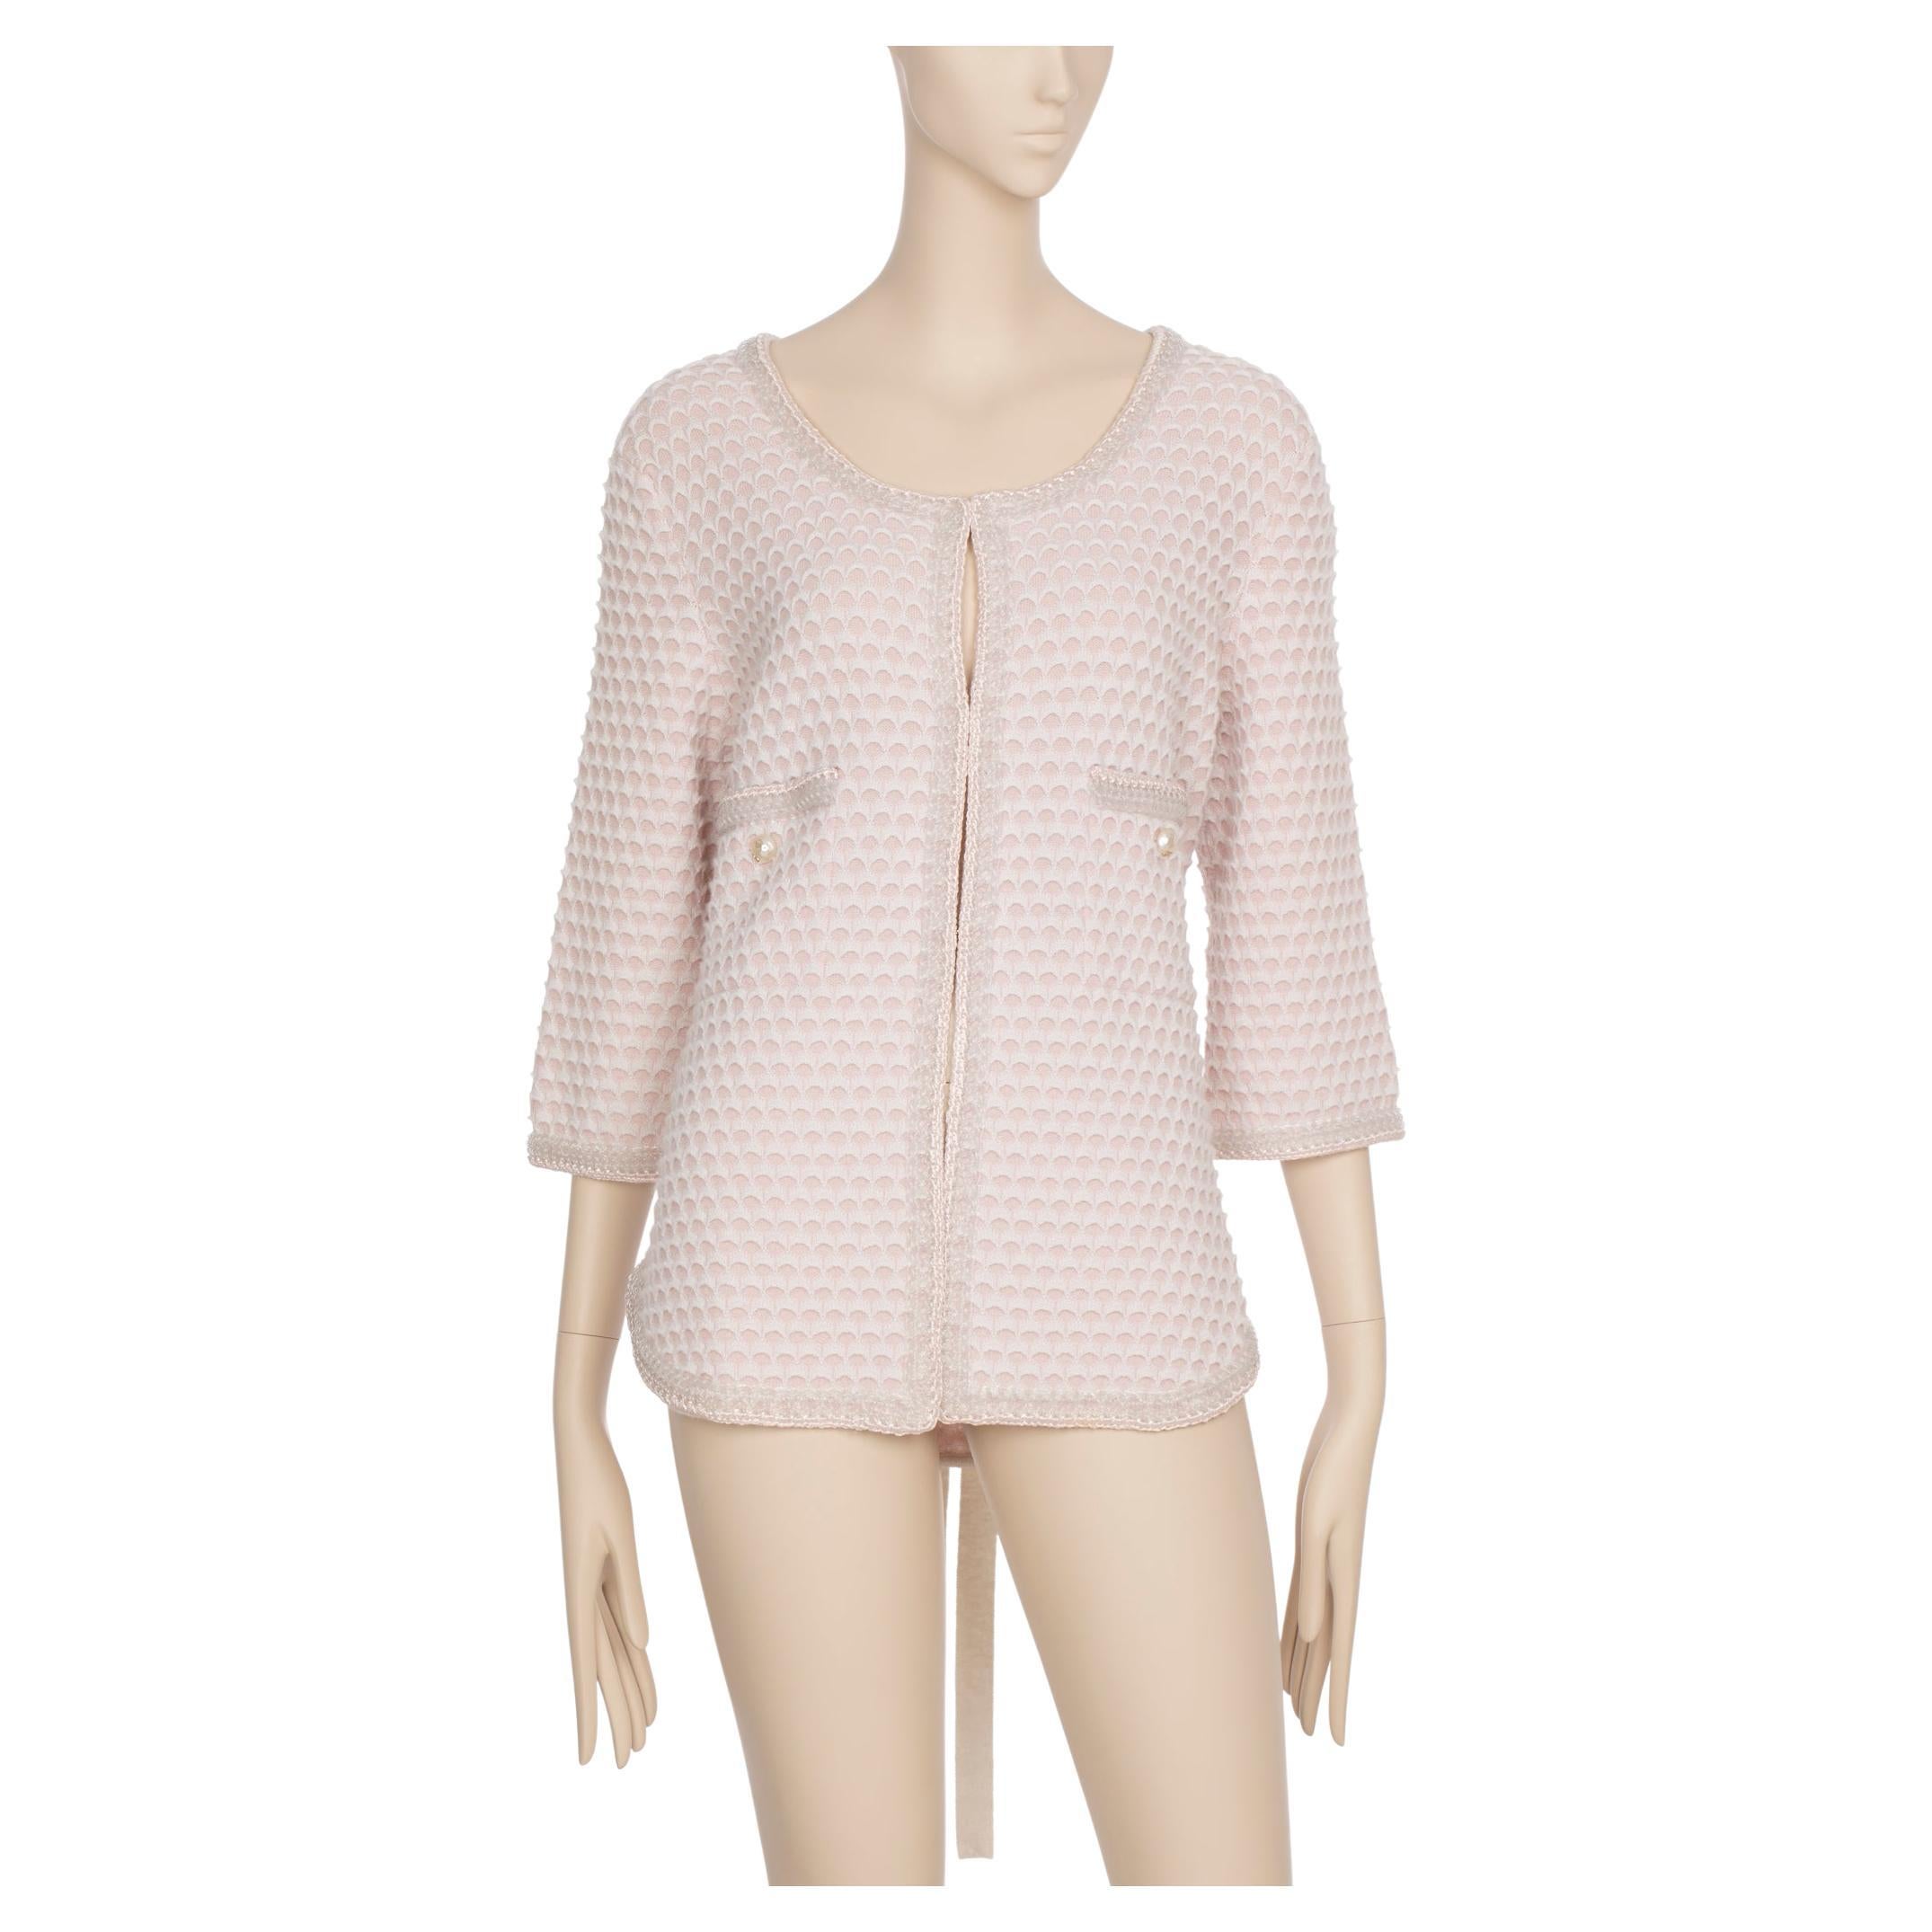 Chanel Pink Cashmere Tweed Cardigan With Waist Band 42 FR